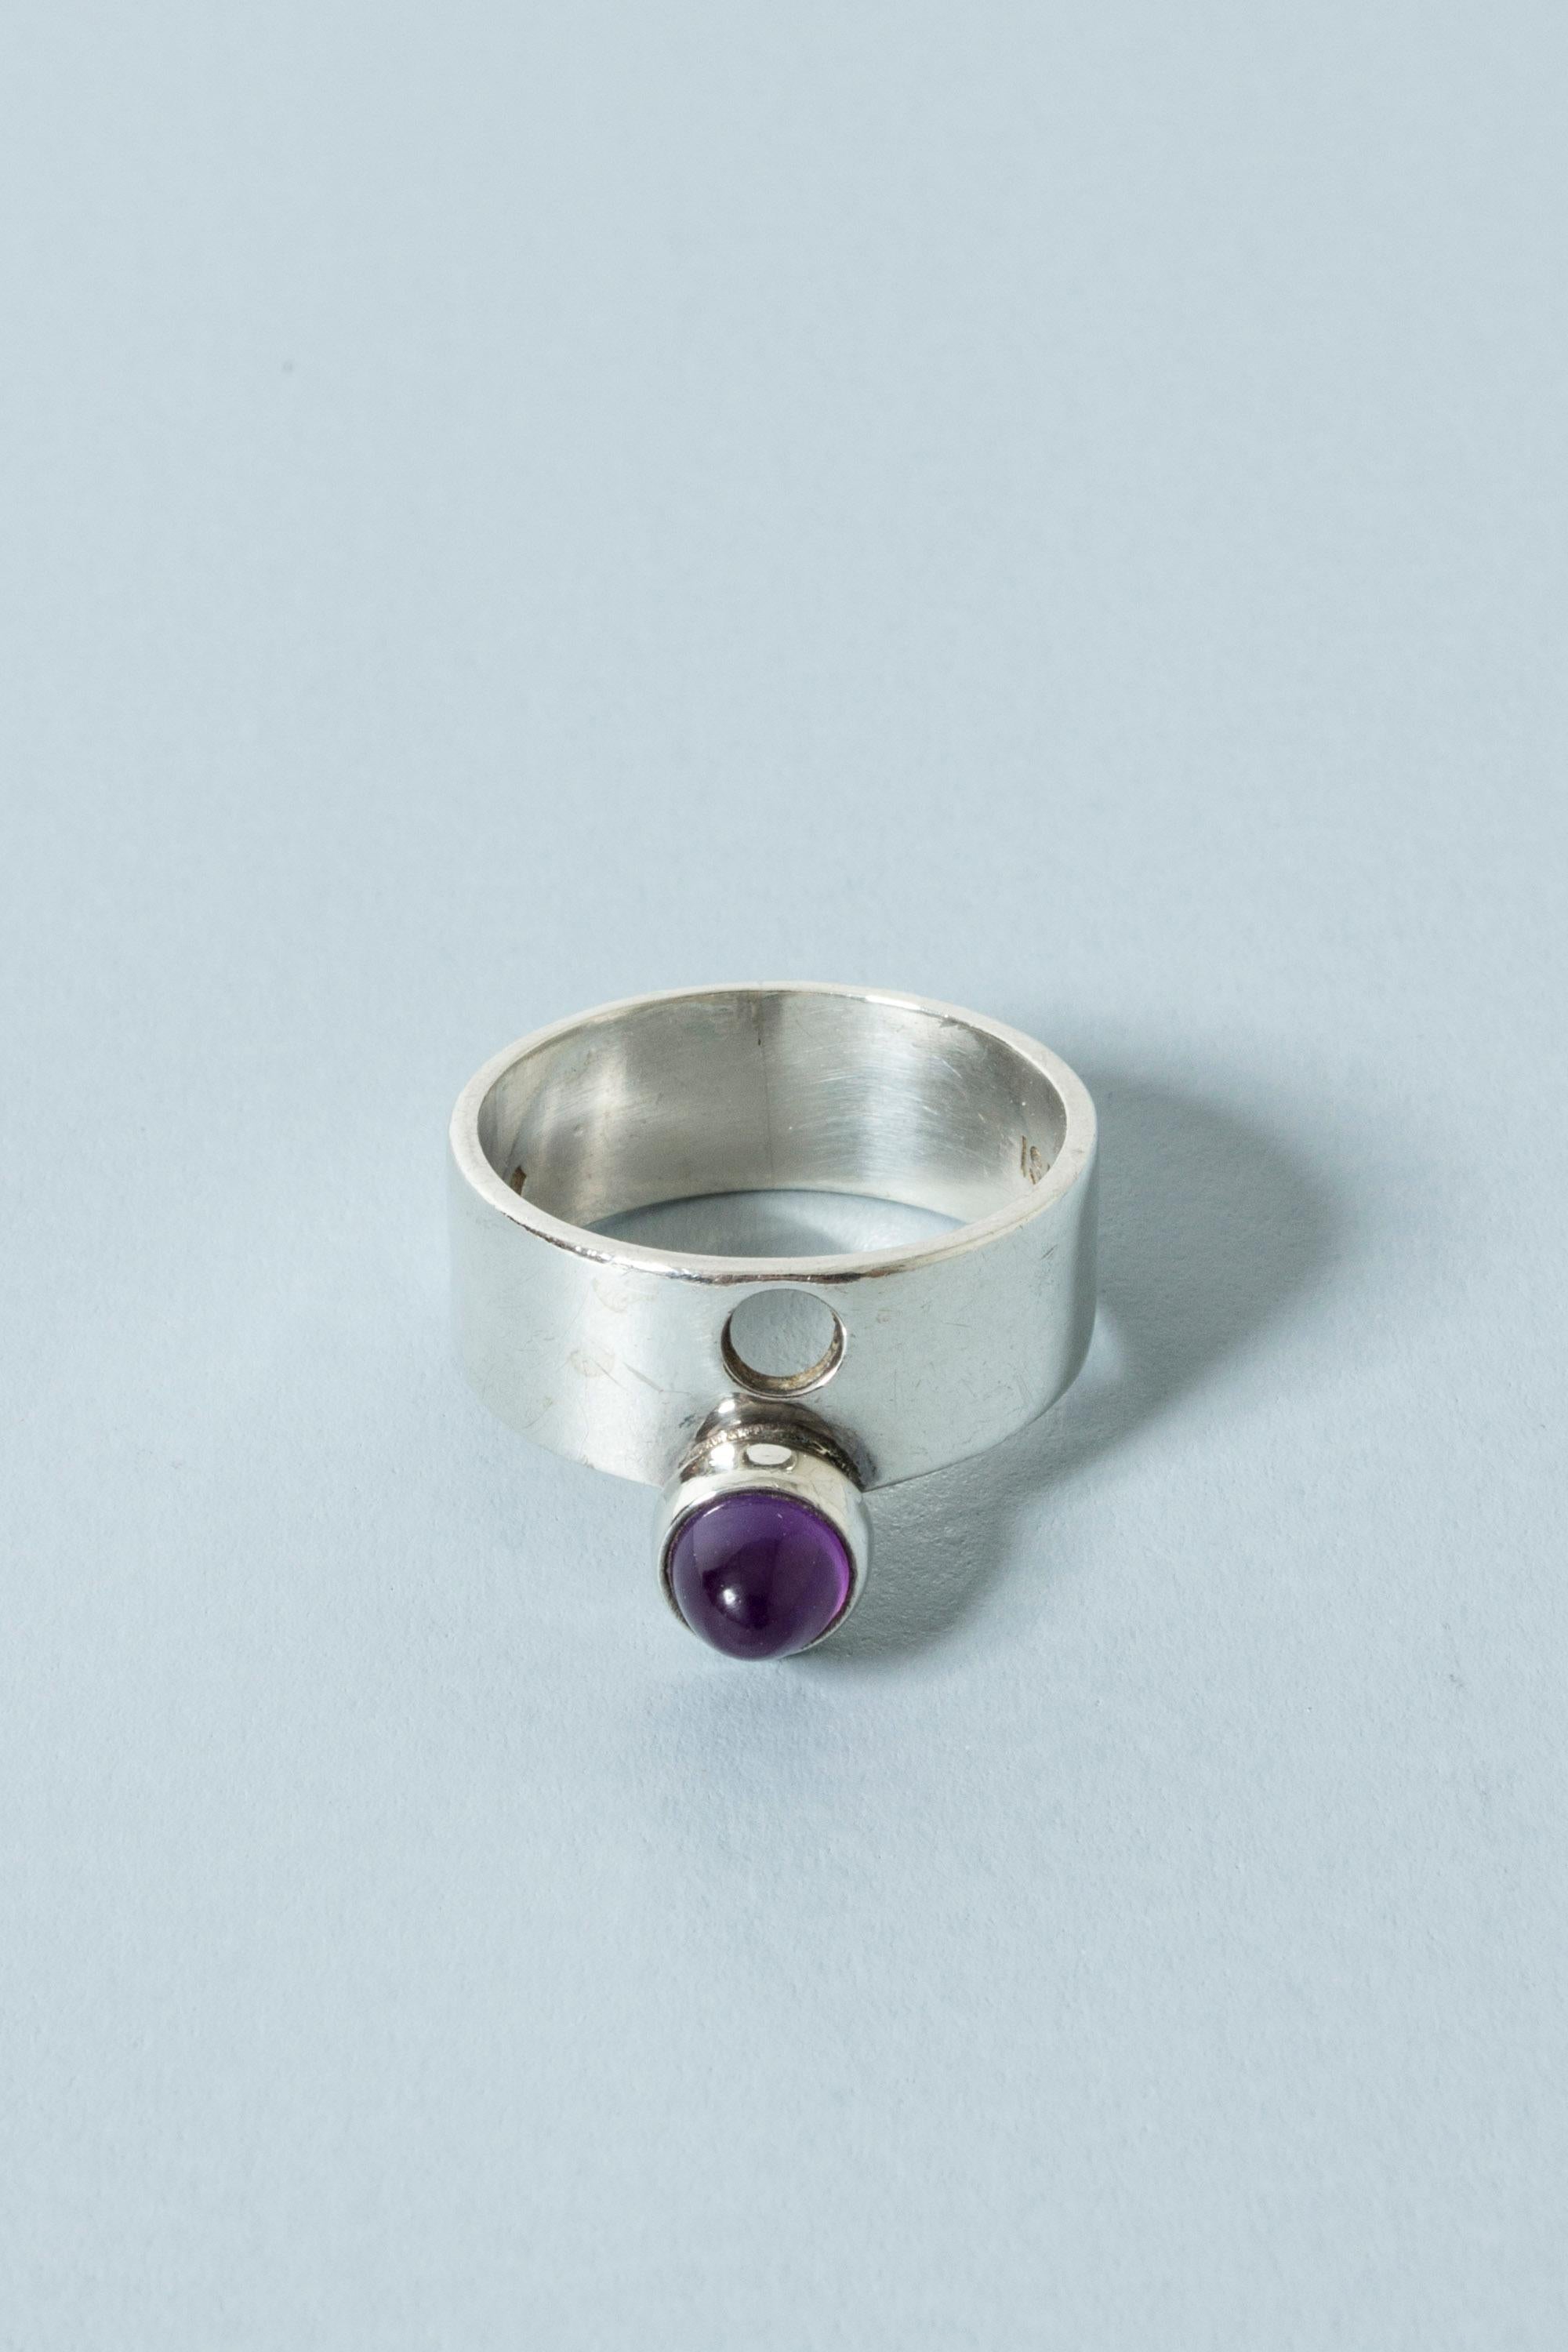 Neat silver ring by Isaac Cohen, with a pointy amethyst stone set on the edge of the of the band. Perforated hole above the stone adds to the cool design.